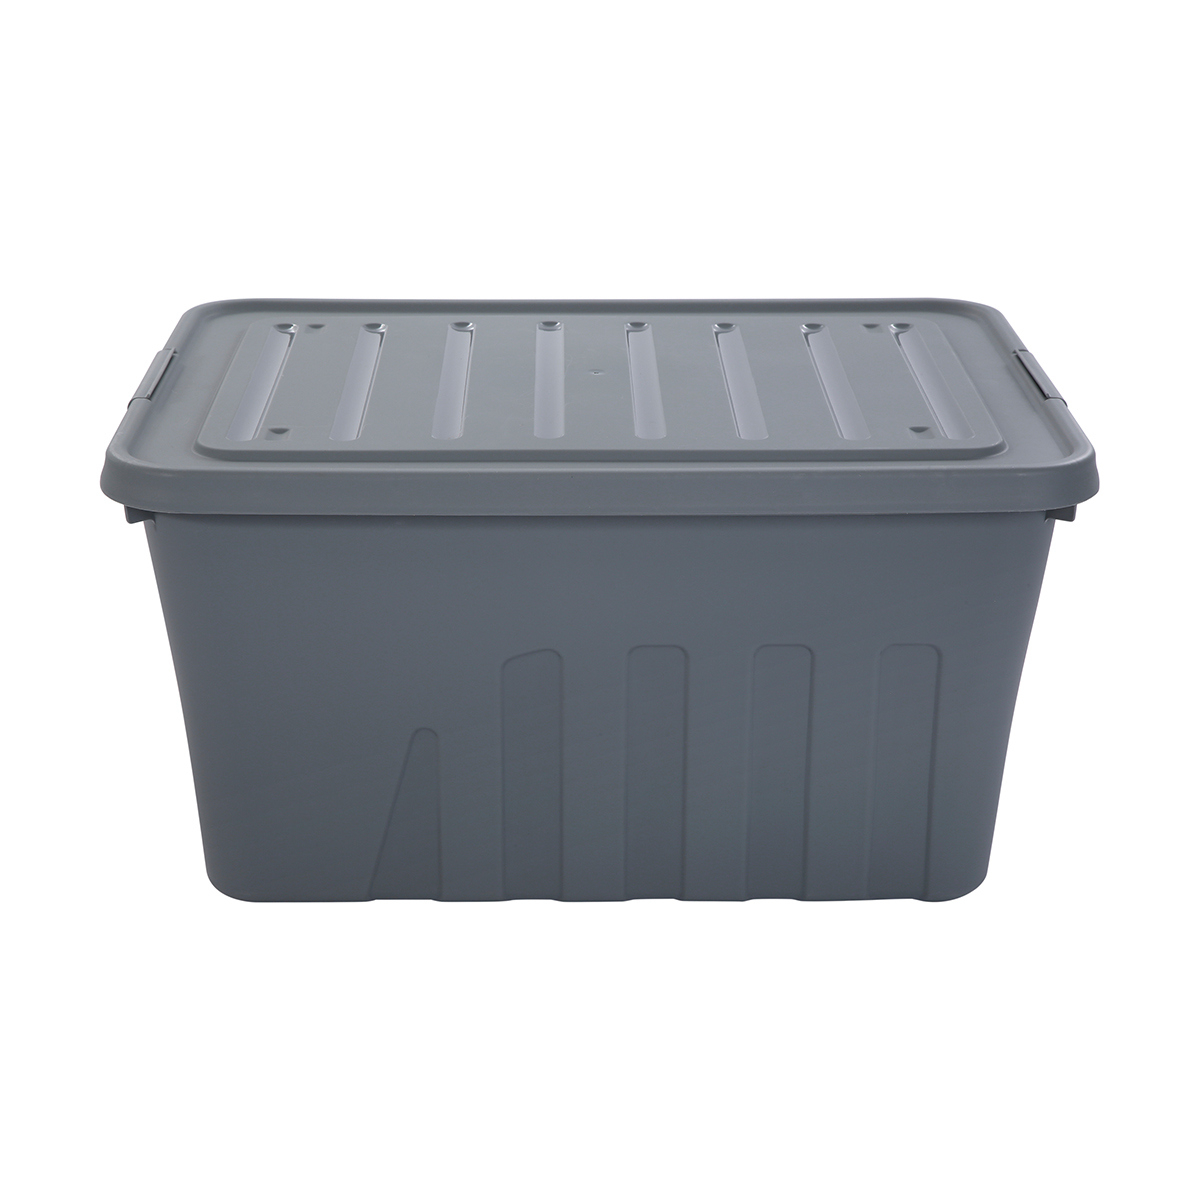 60l Storage Container On Wheels Kmart intended for measurements 1200 X 1200